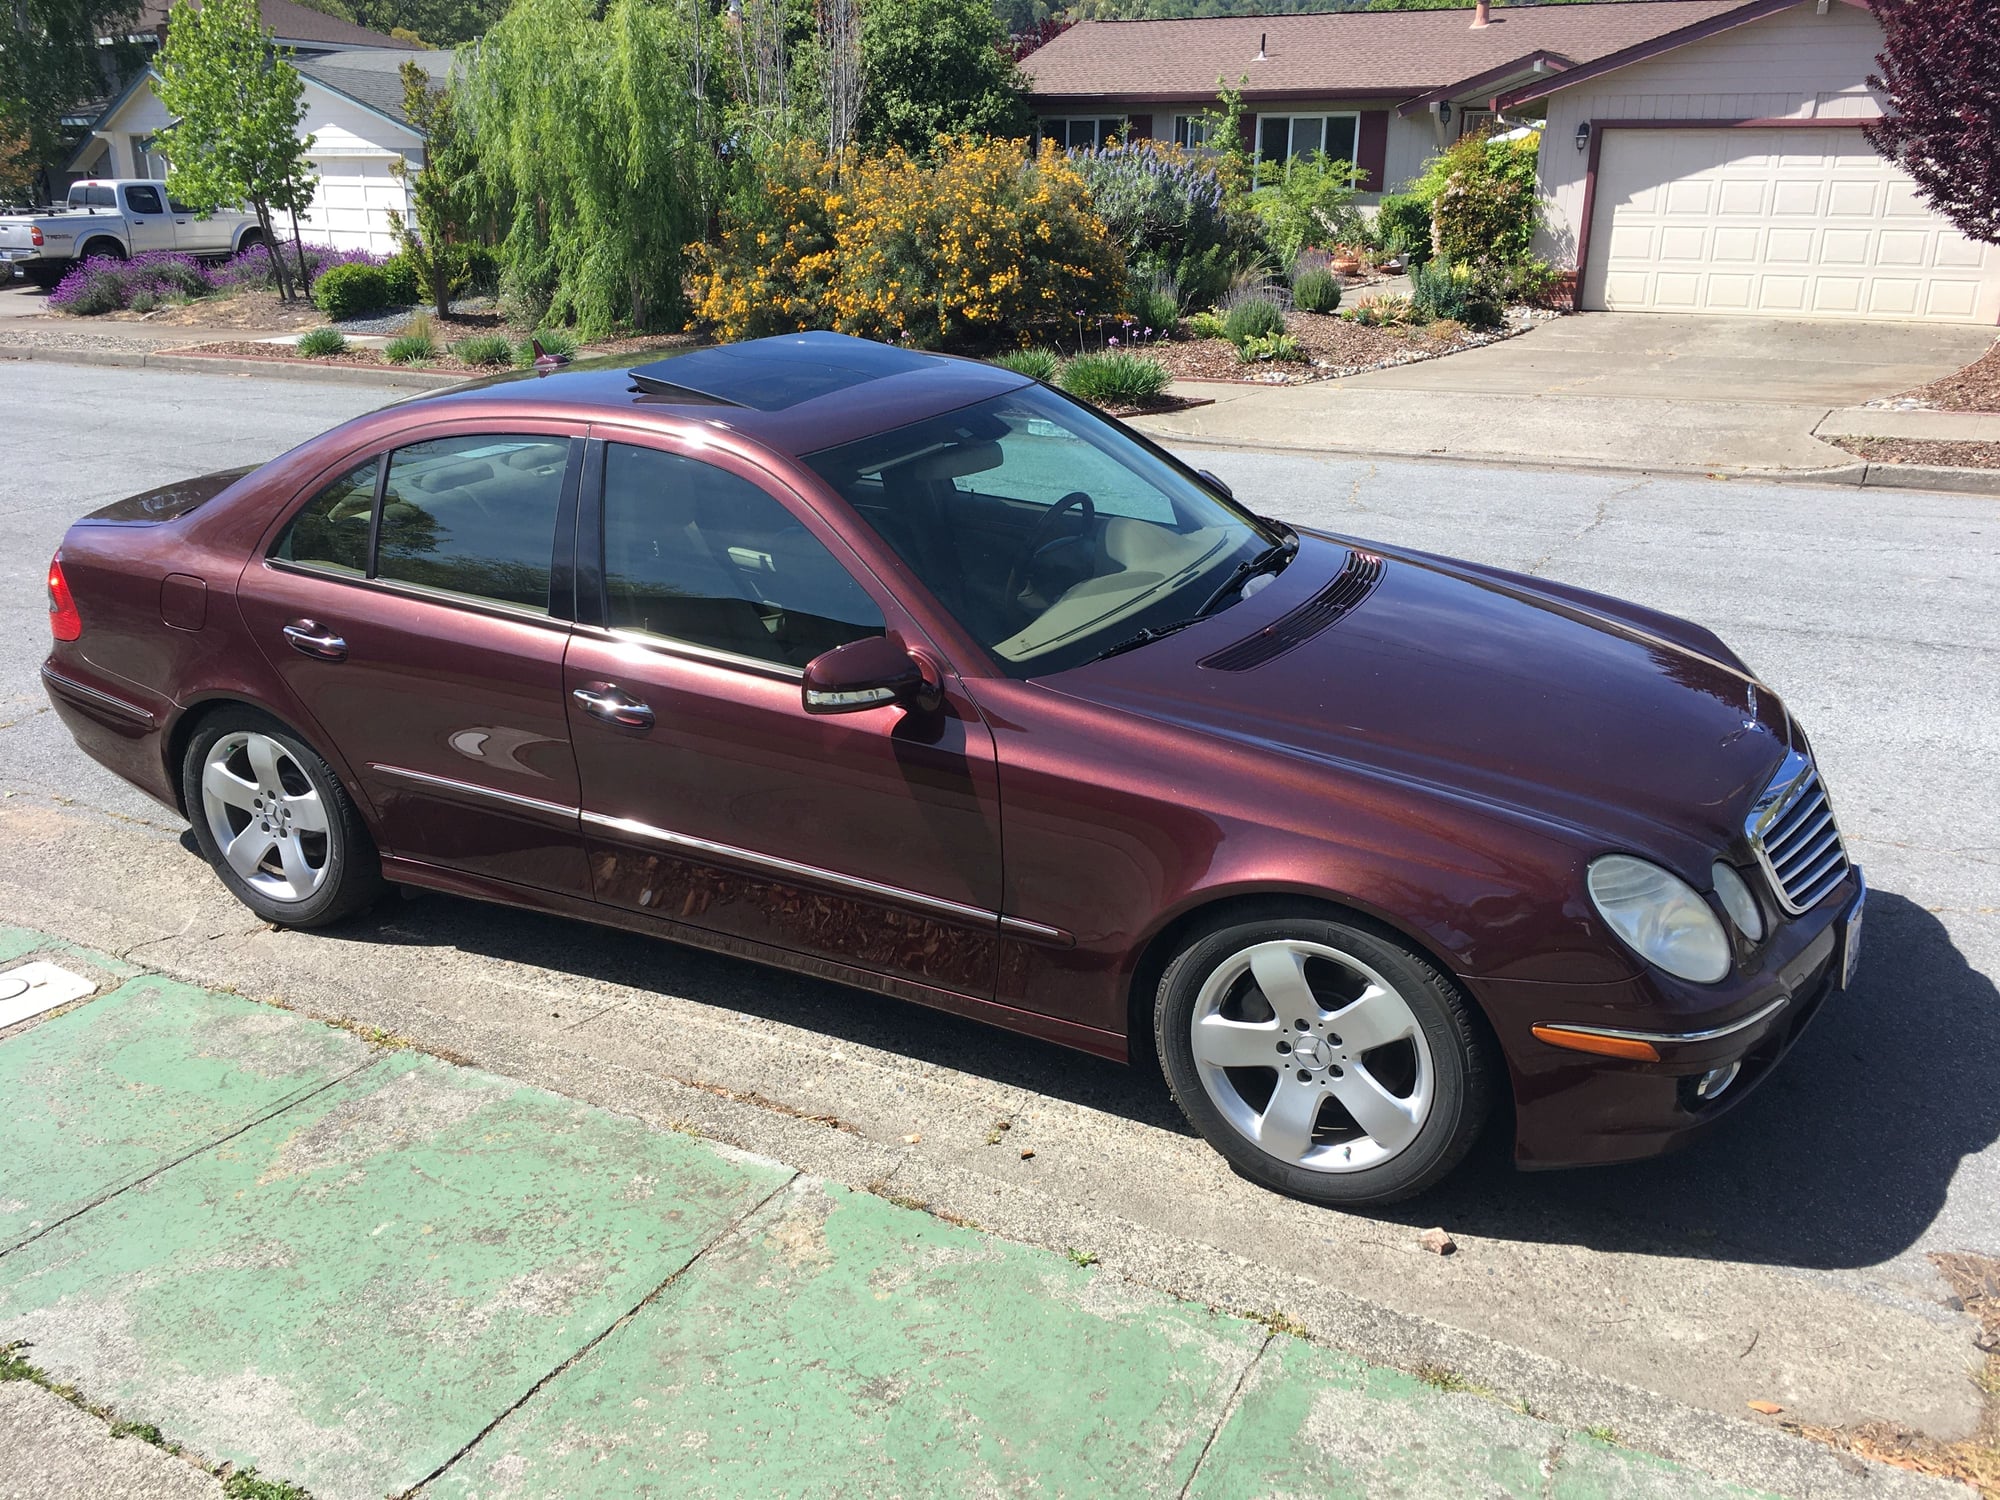 2007 Mercedes-Benz E550 - E550 Sedan 2007 - Highly Optioned - 382HP - 26MPG - Only $4,995 - Used - VIN WDBUF72X678044892 - 8 cyl - 2WD - Automatic - Sedan - Red - Novato, CA 94947, United States